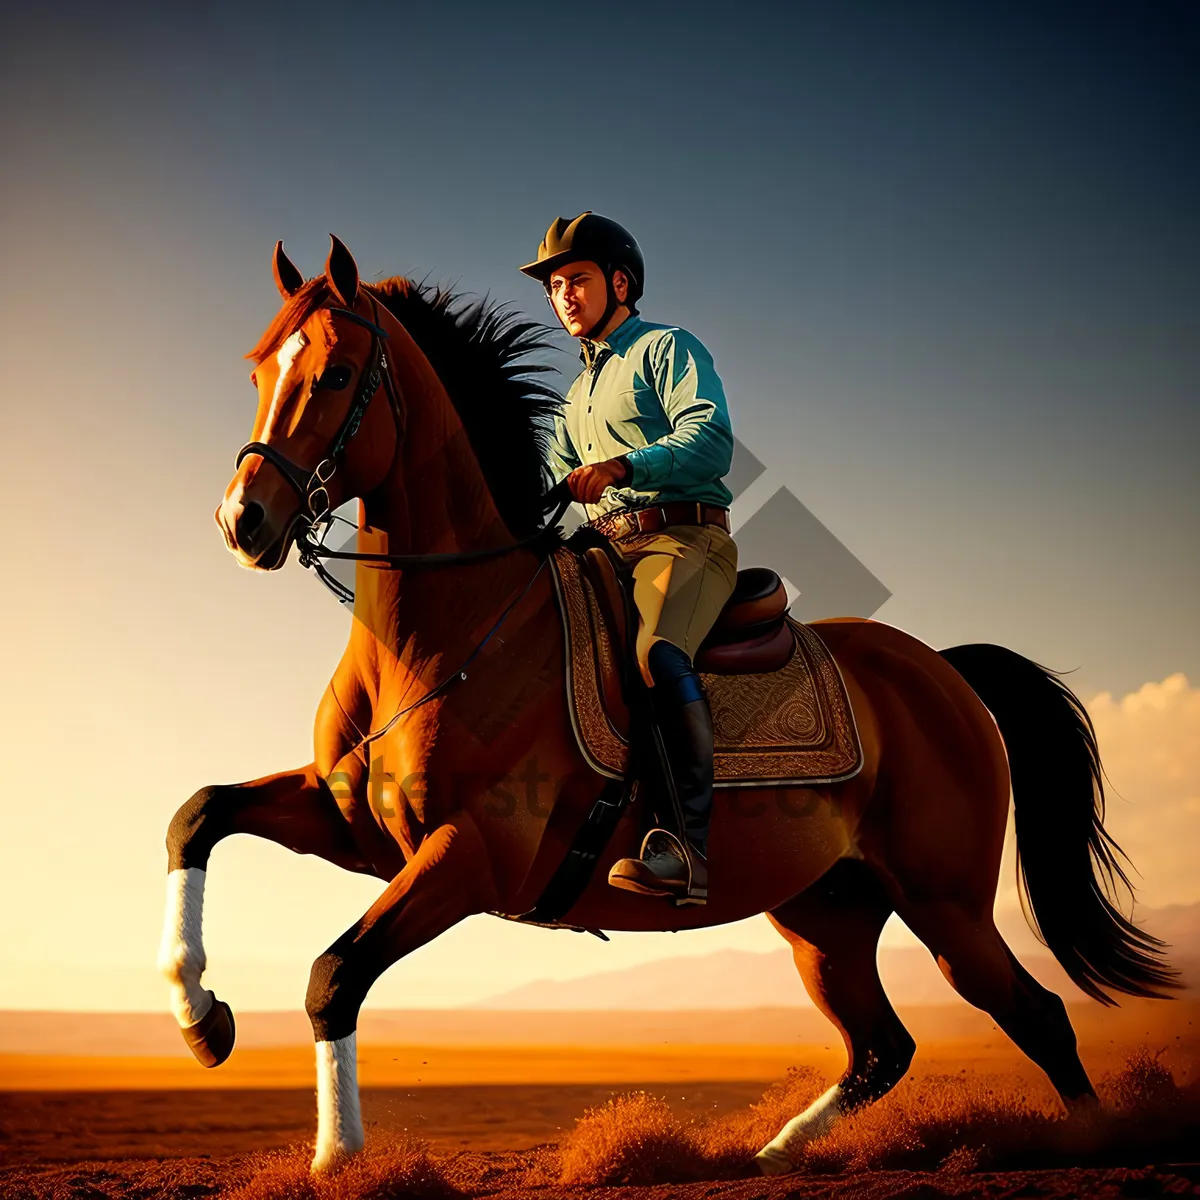 Picture of Silhouette of a Rider on a Thoroughbred Horse at Sunset.